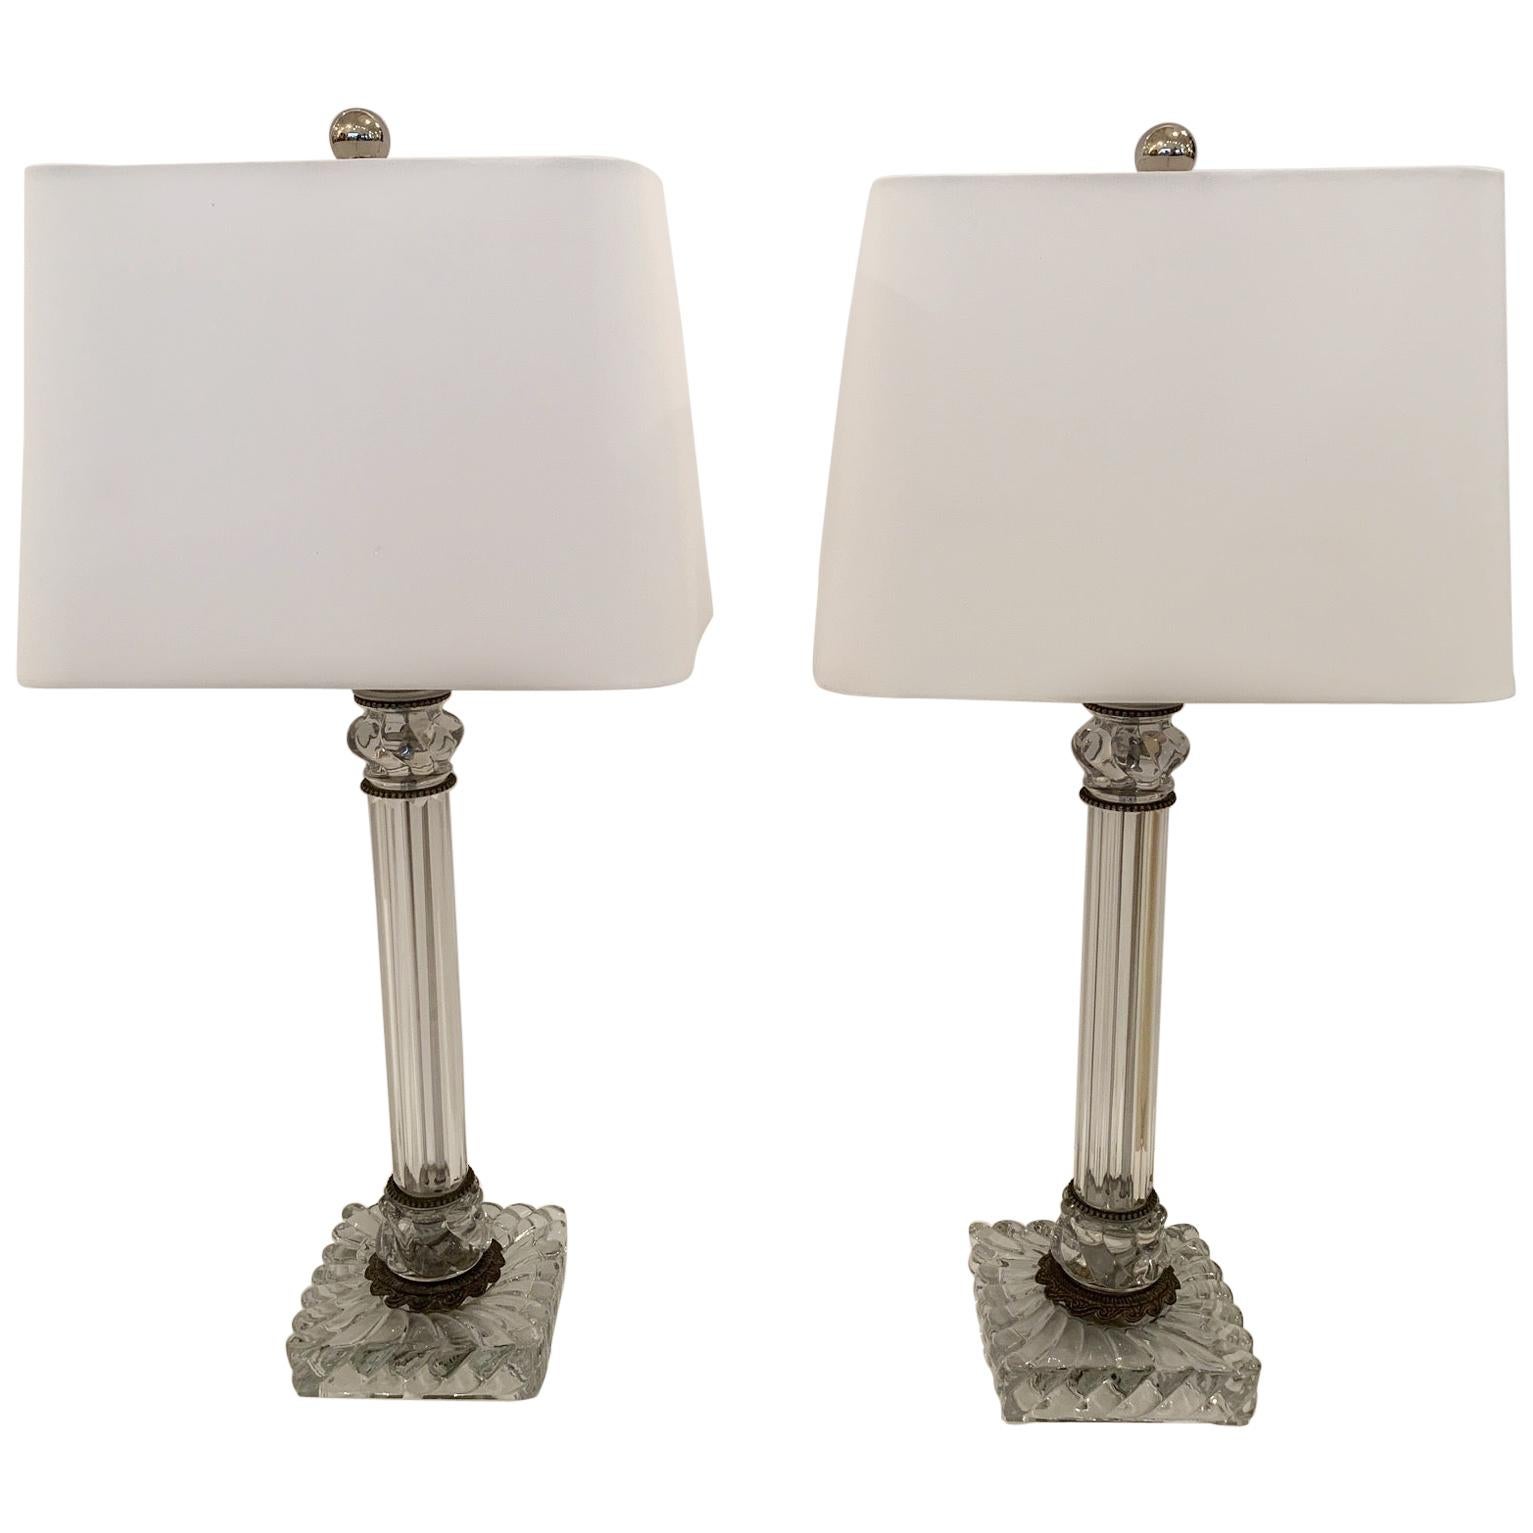 Pair of Elegant Baccarat Style Table Lamps